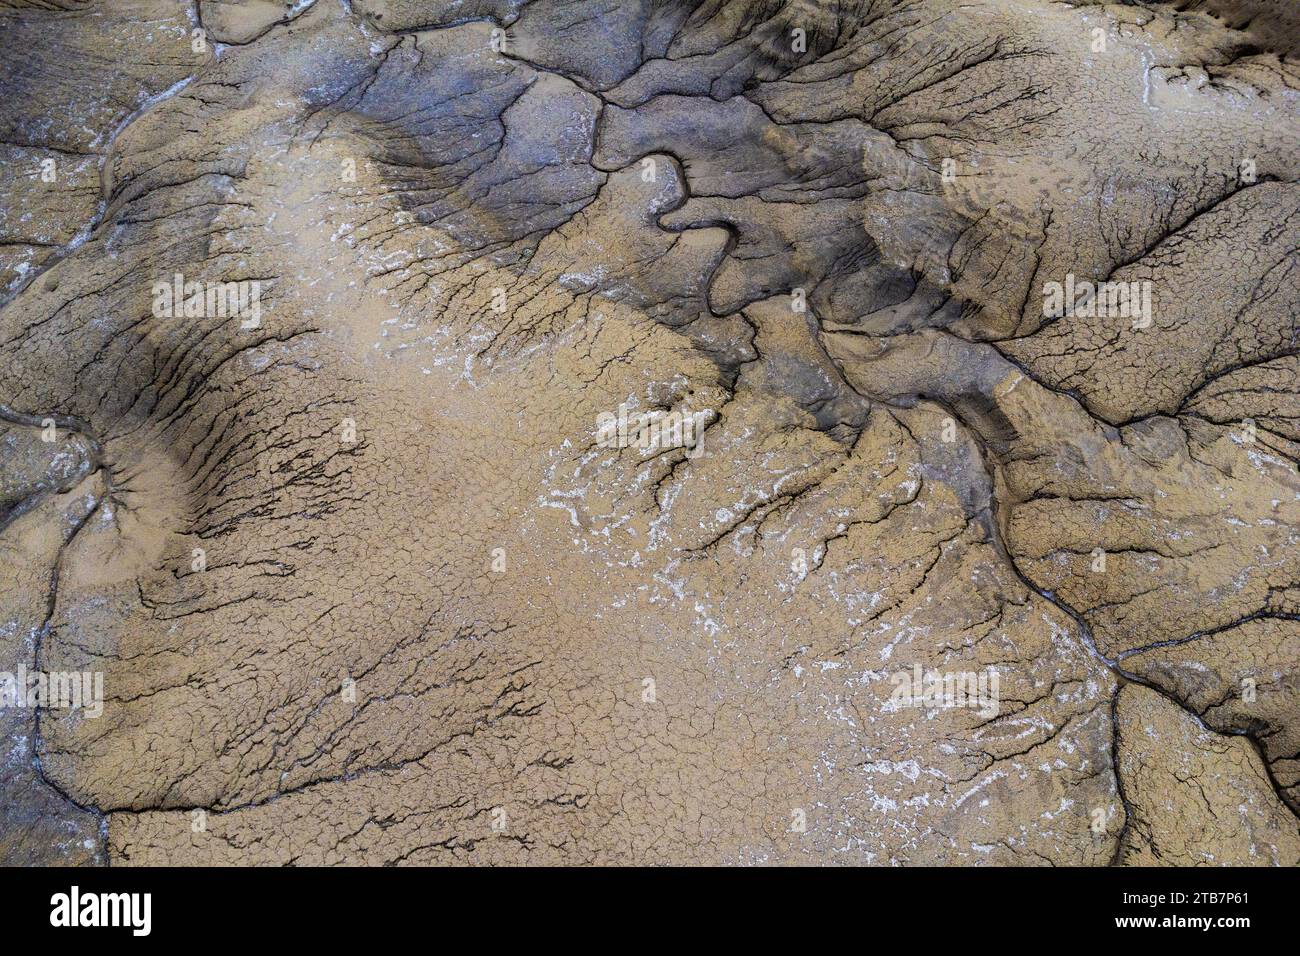 A detailed view of a riverbed with clear flowing water revealing ...